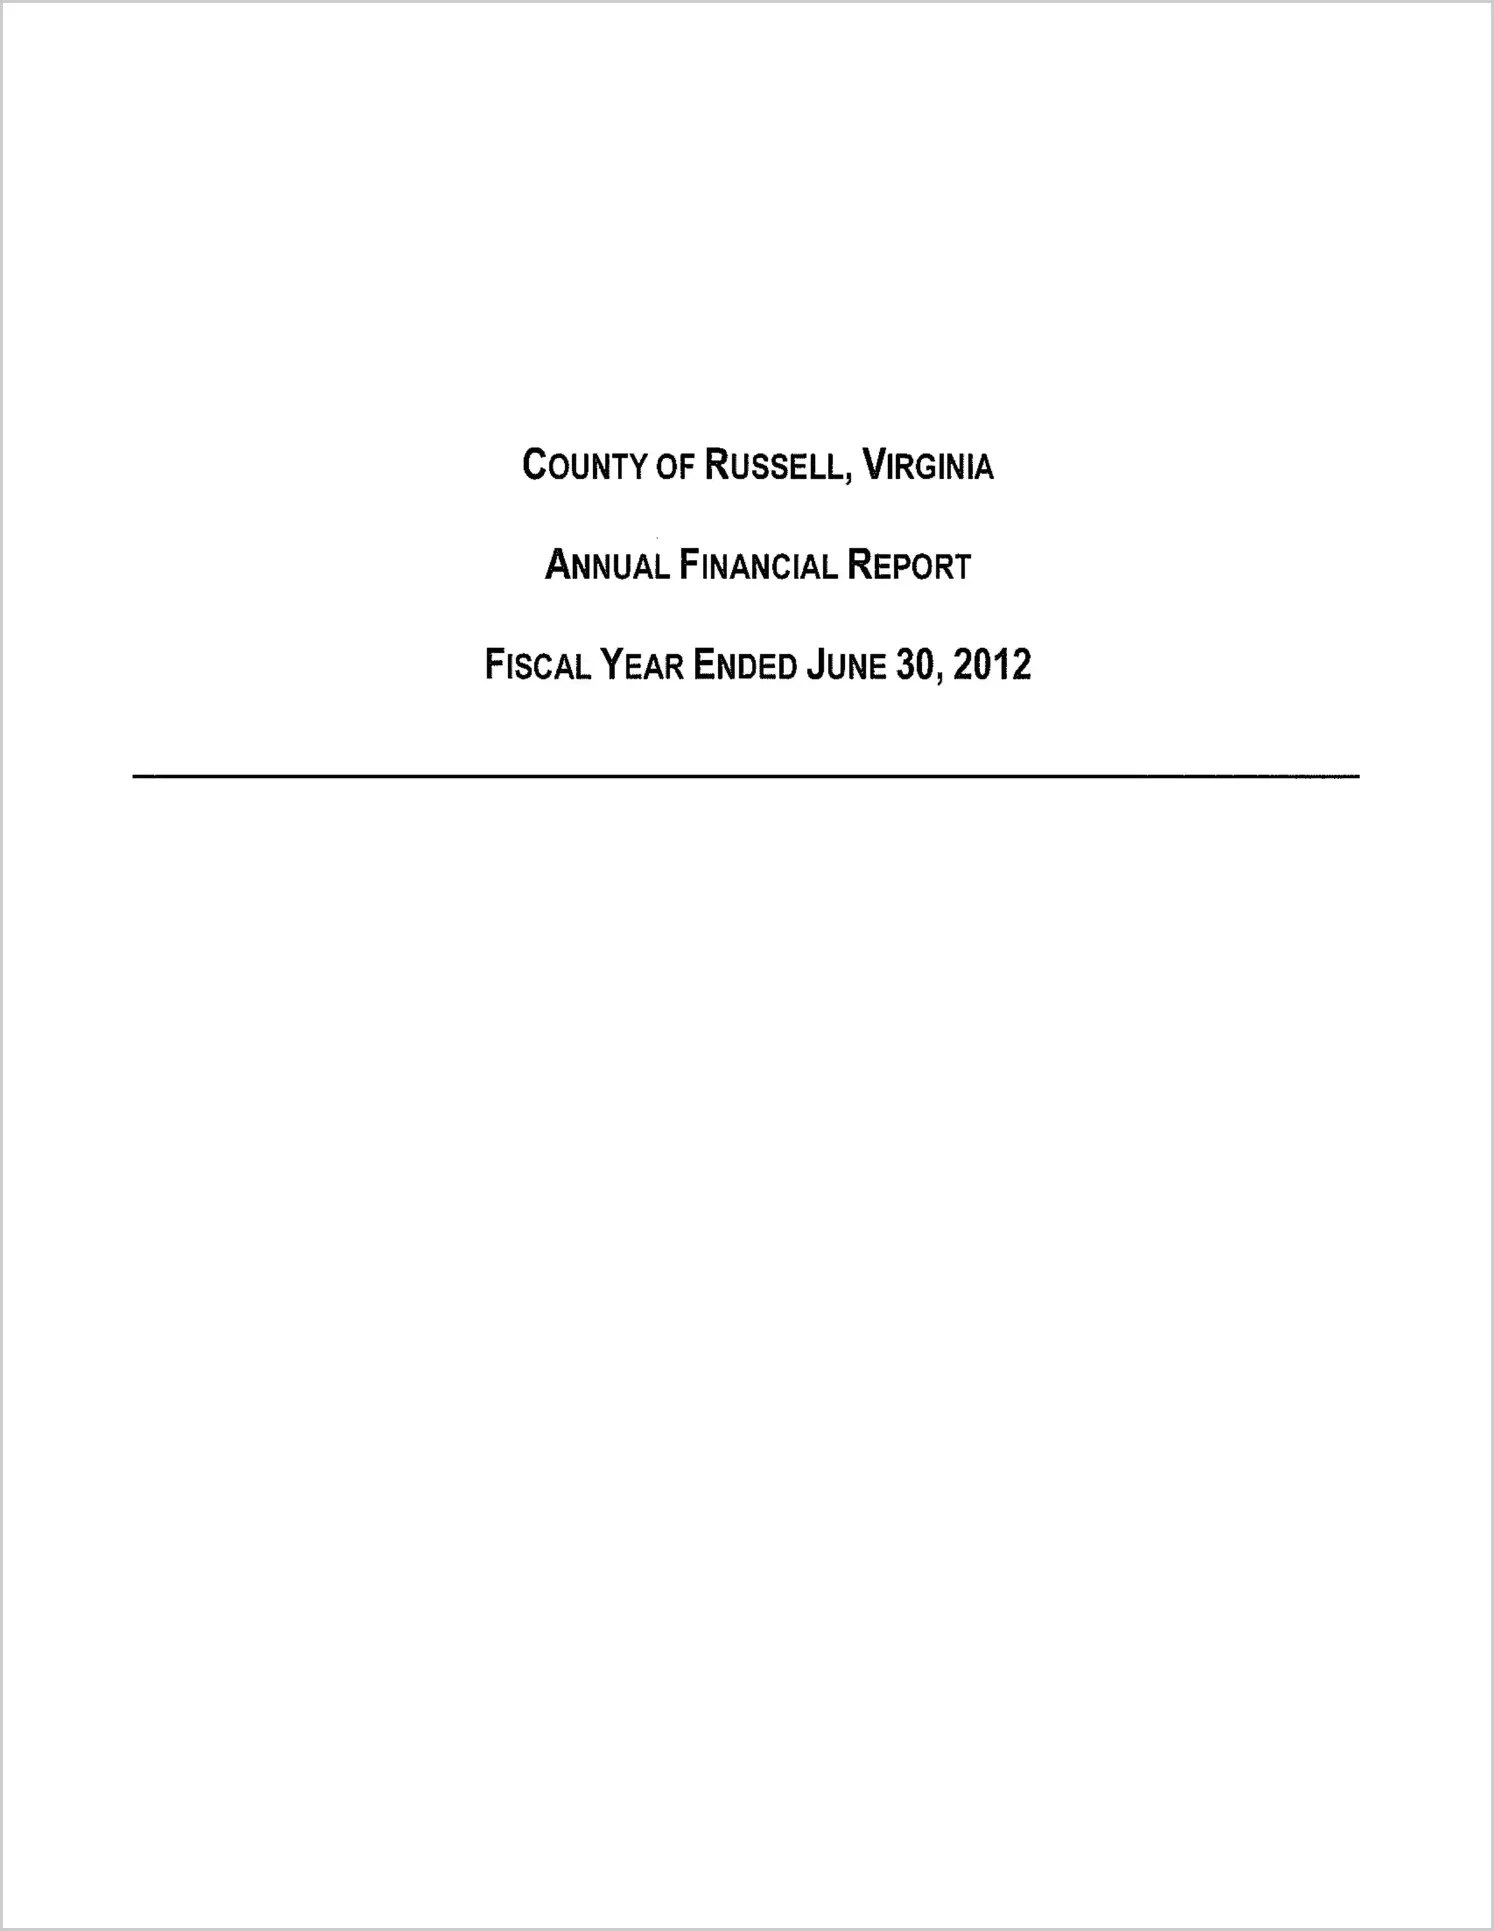 2012 Annual Financial Report for County of Russell